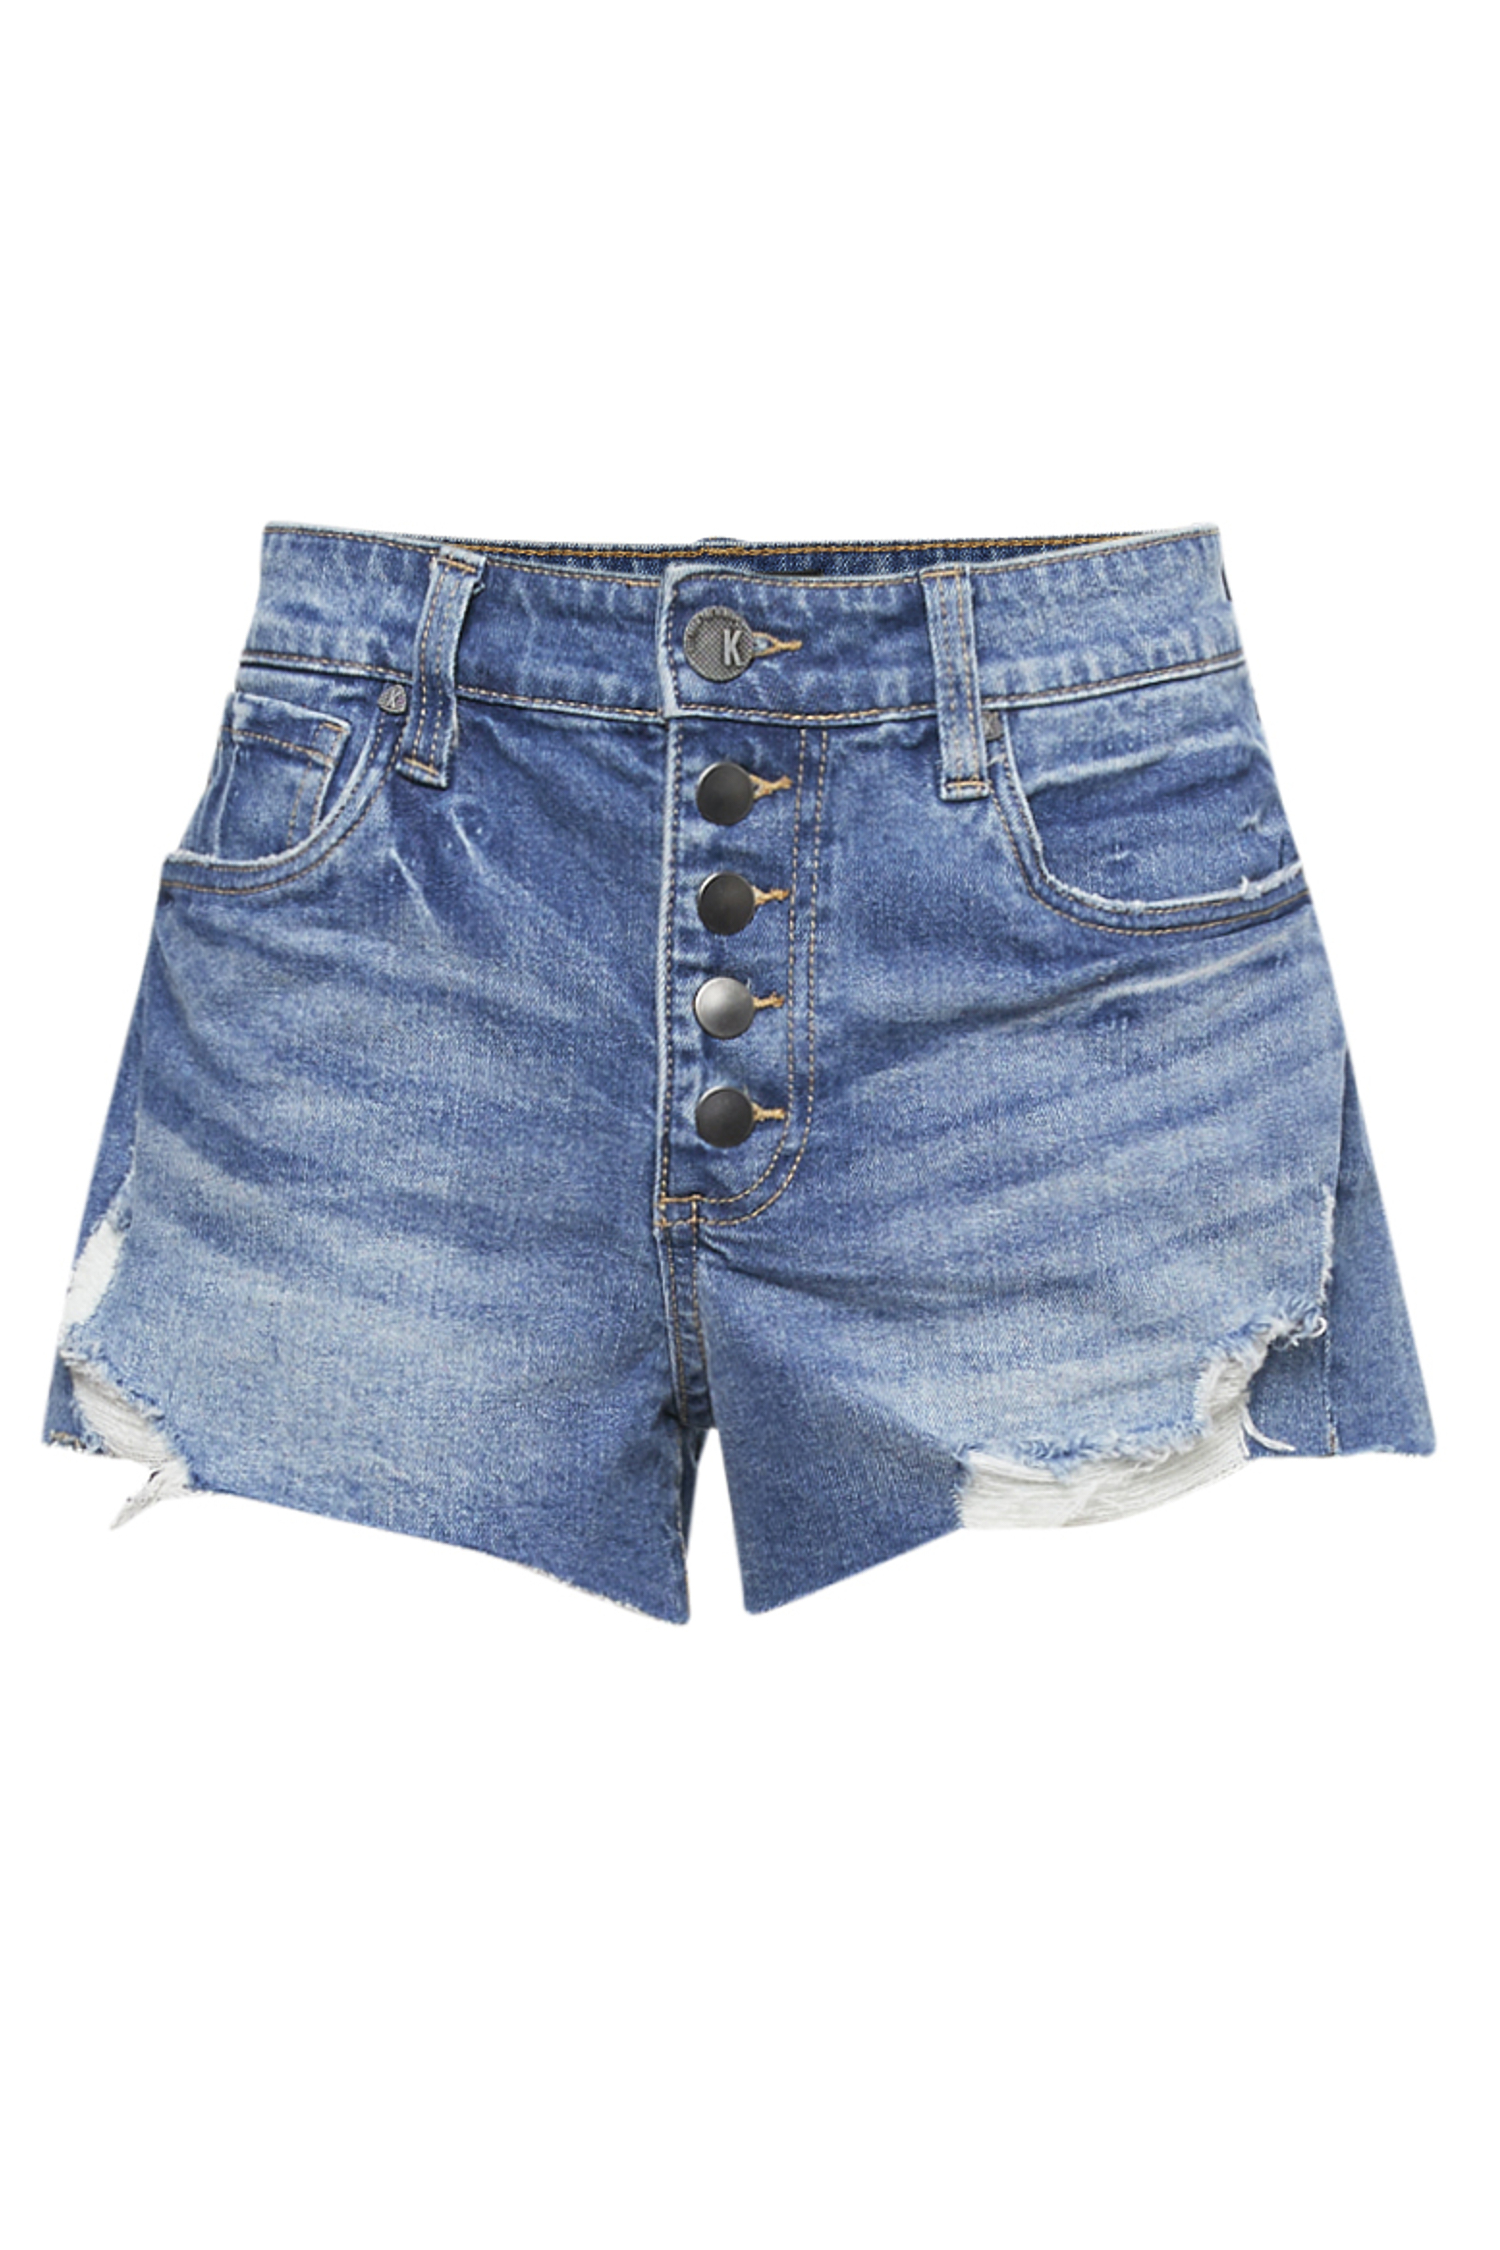 Kut from the Kloth Exposed Button Fly Shorts in Medium Blue 16 | DAILYLOOK